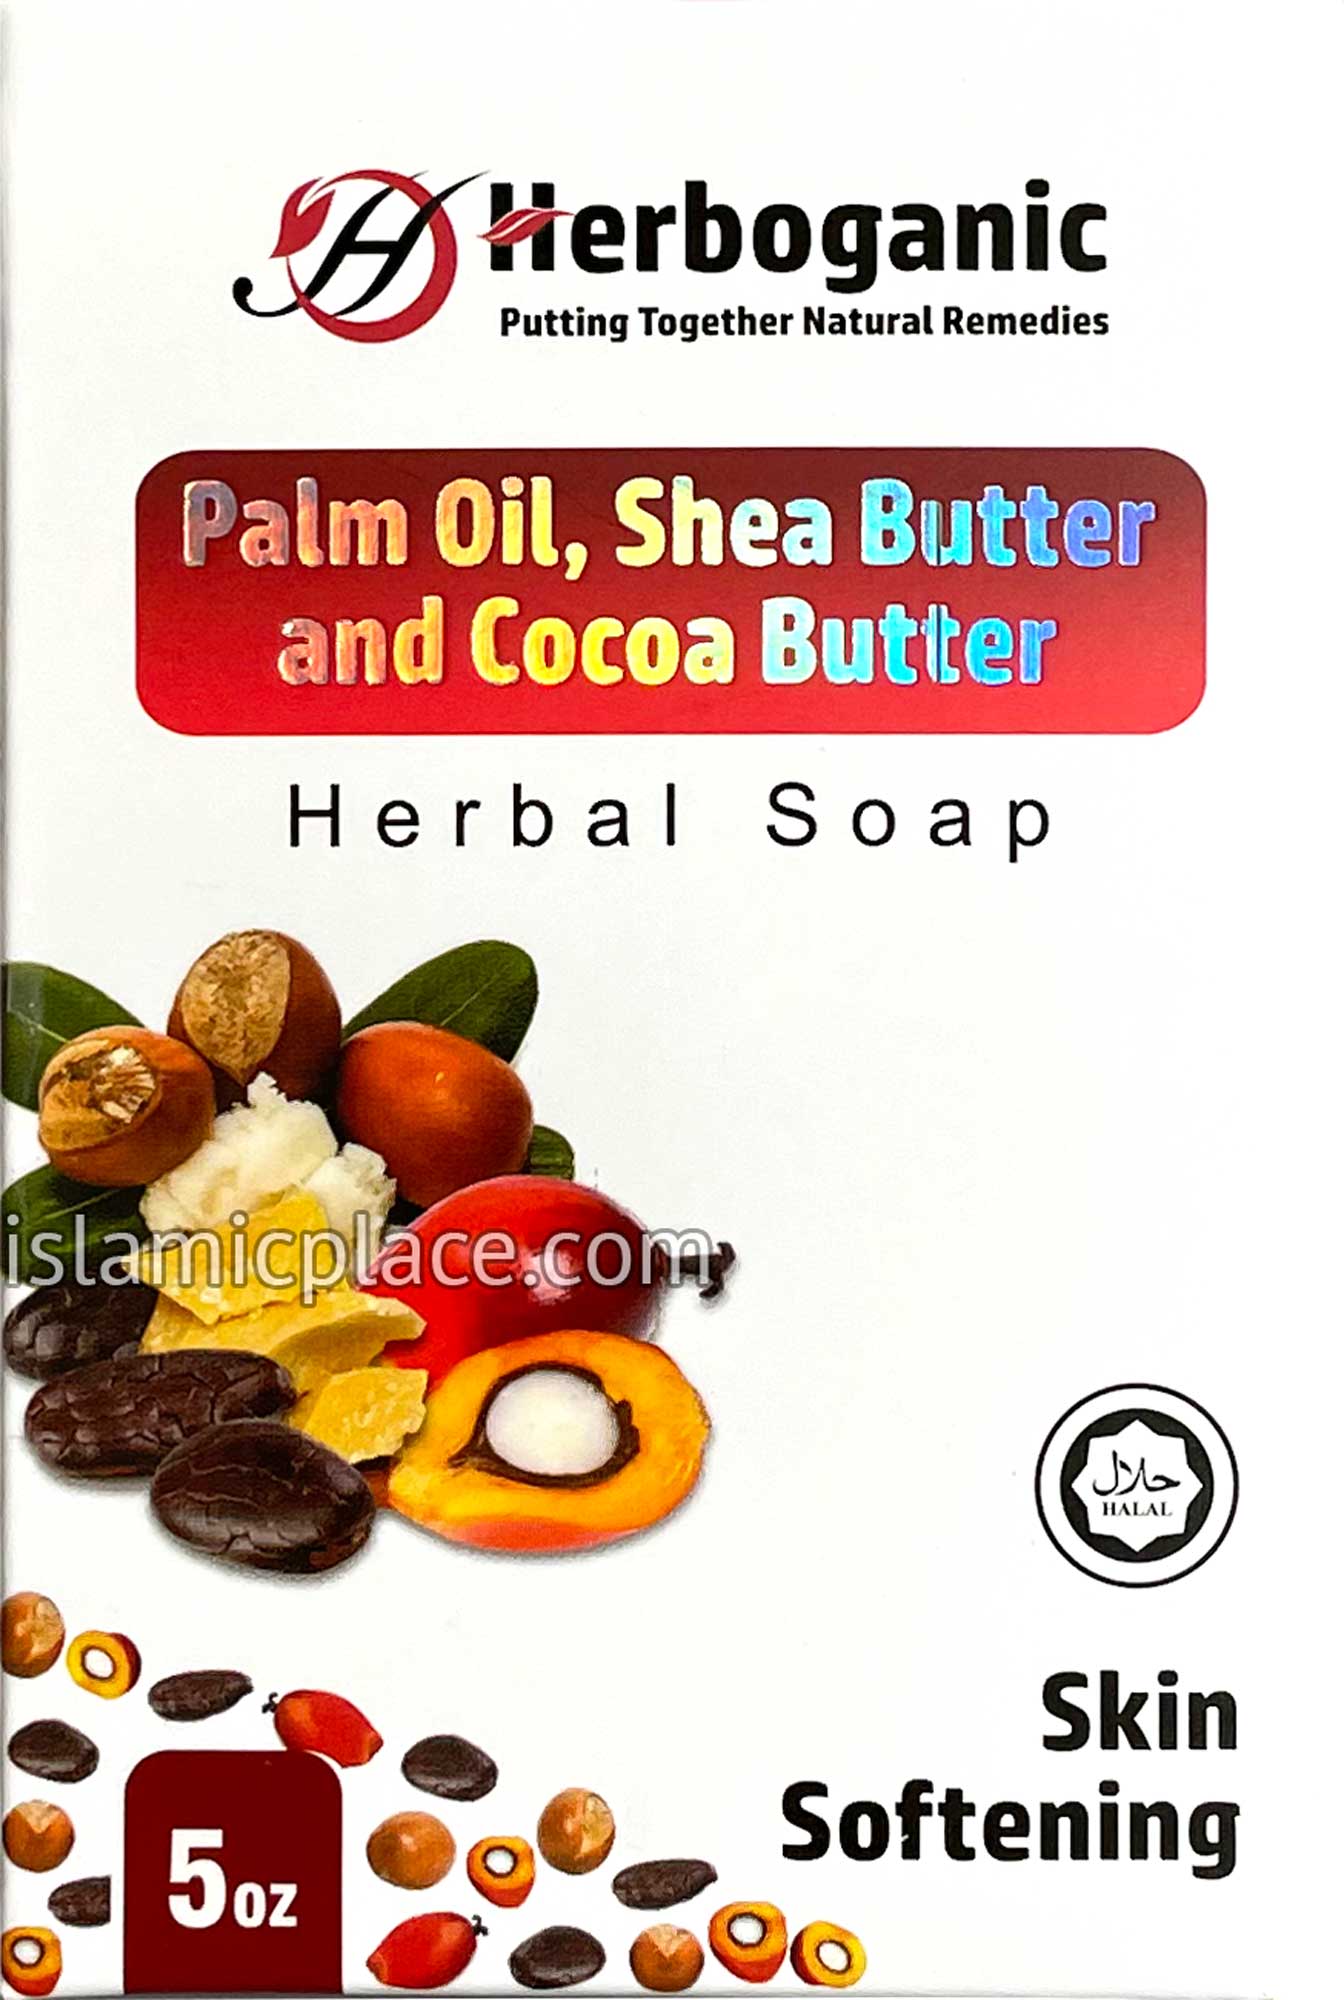 Palm Oil, Shea Butter and Cocoa Butter Herbal Halal Soap - 5 oz